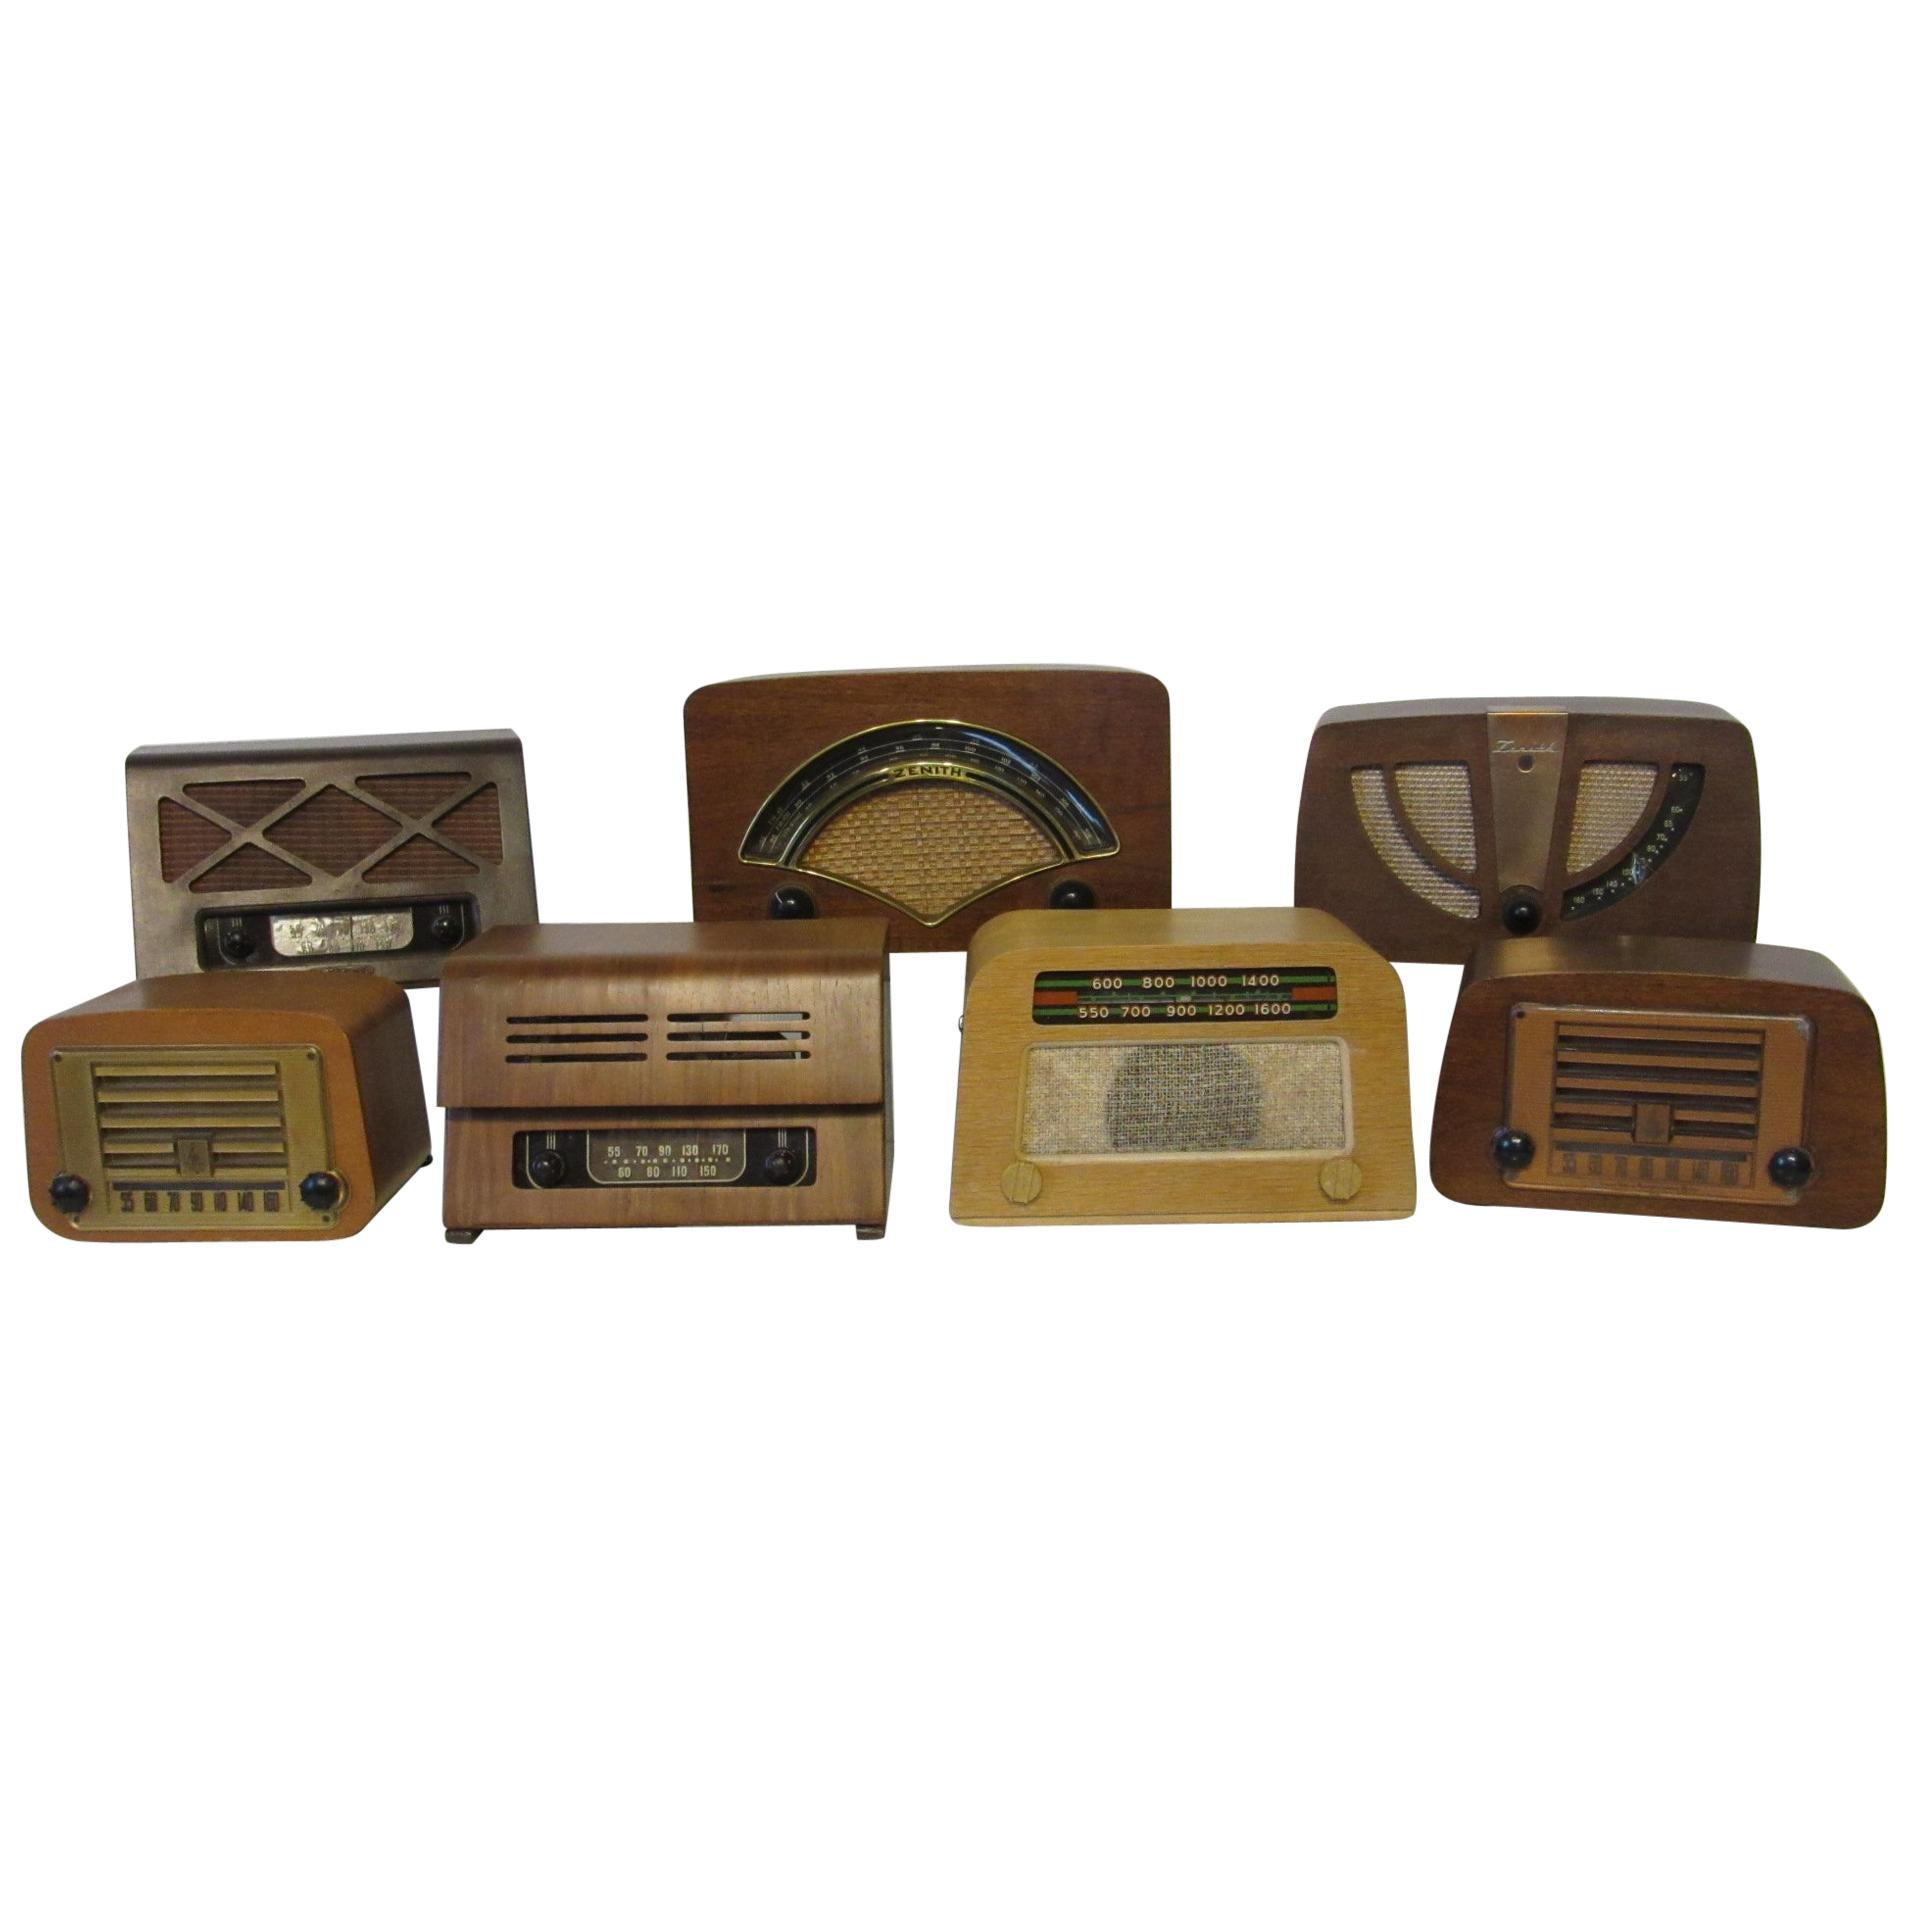 Ray & Charles Eames Designed Radio Collection